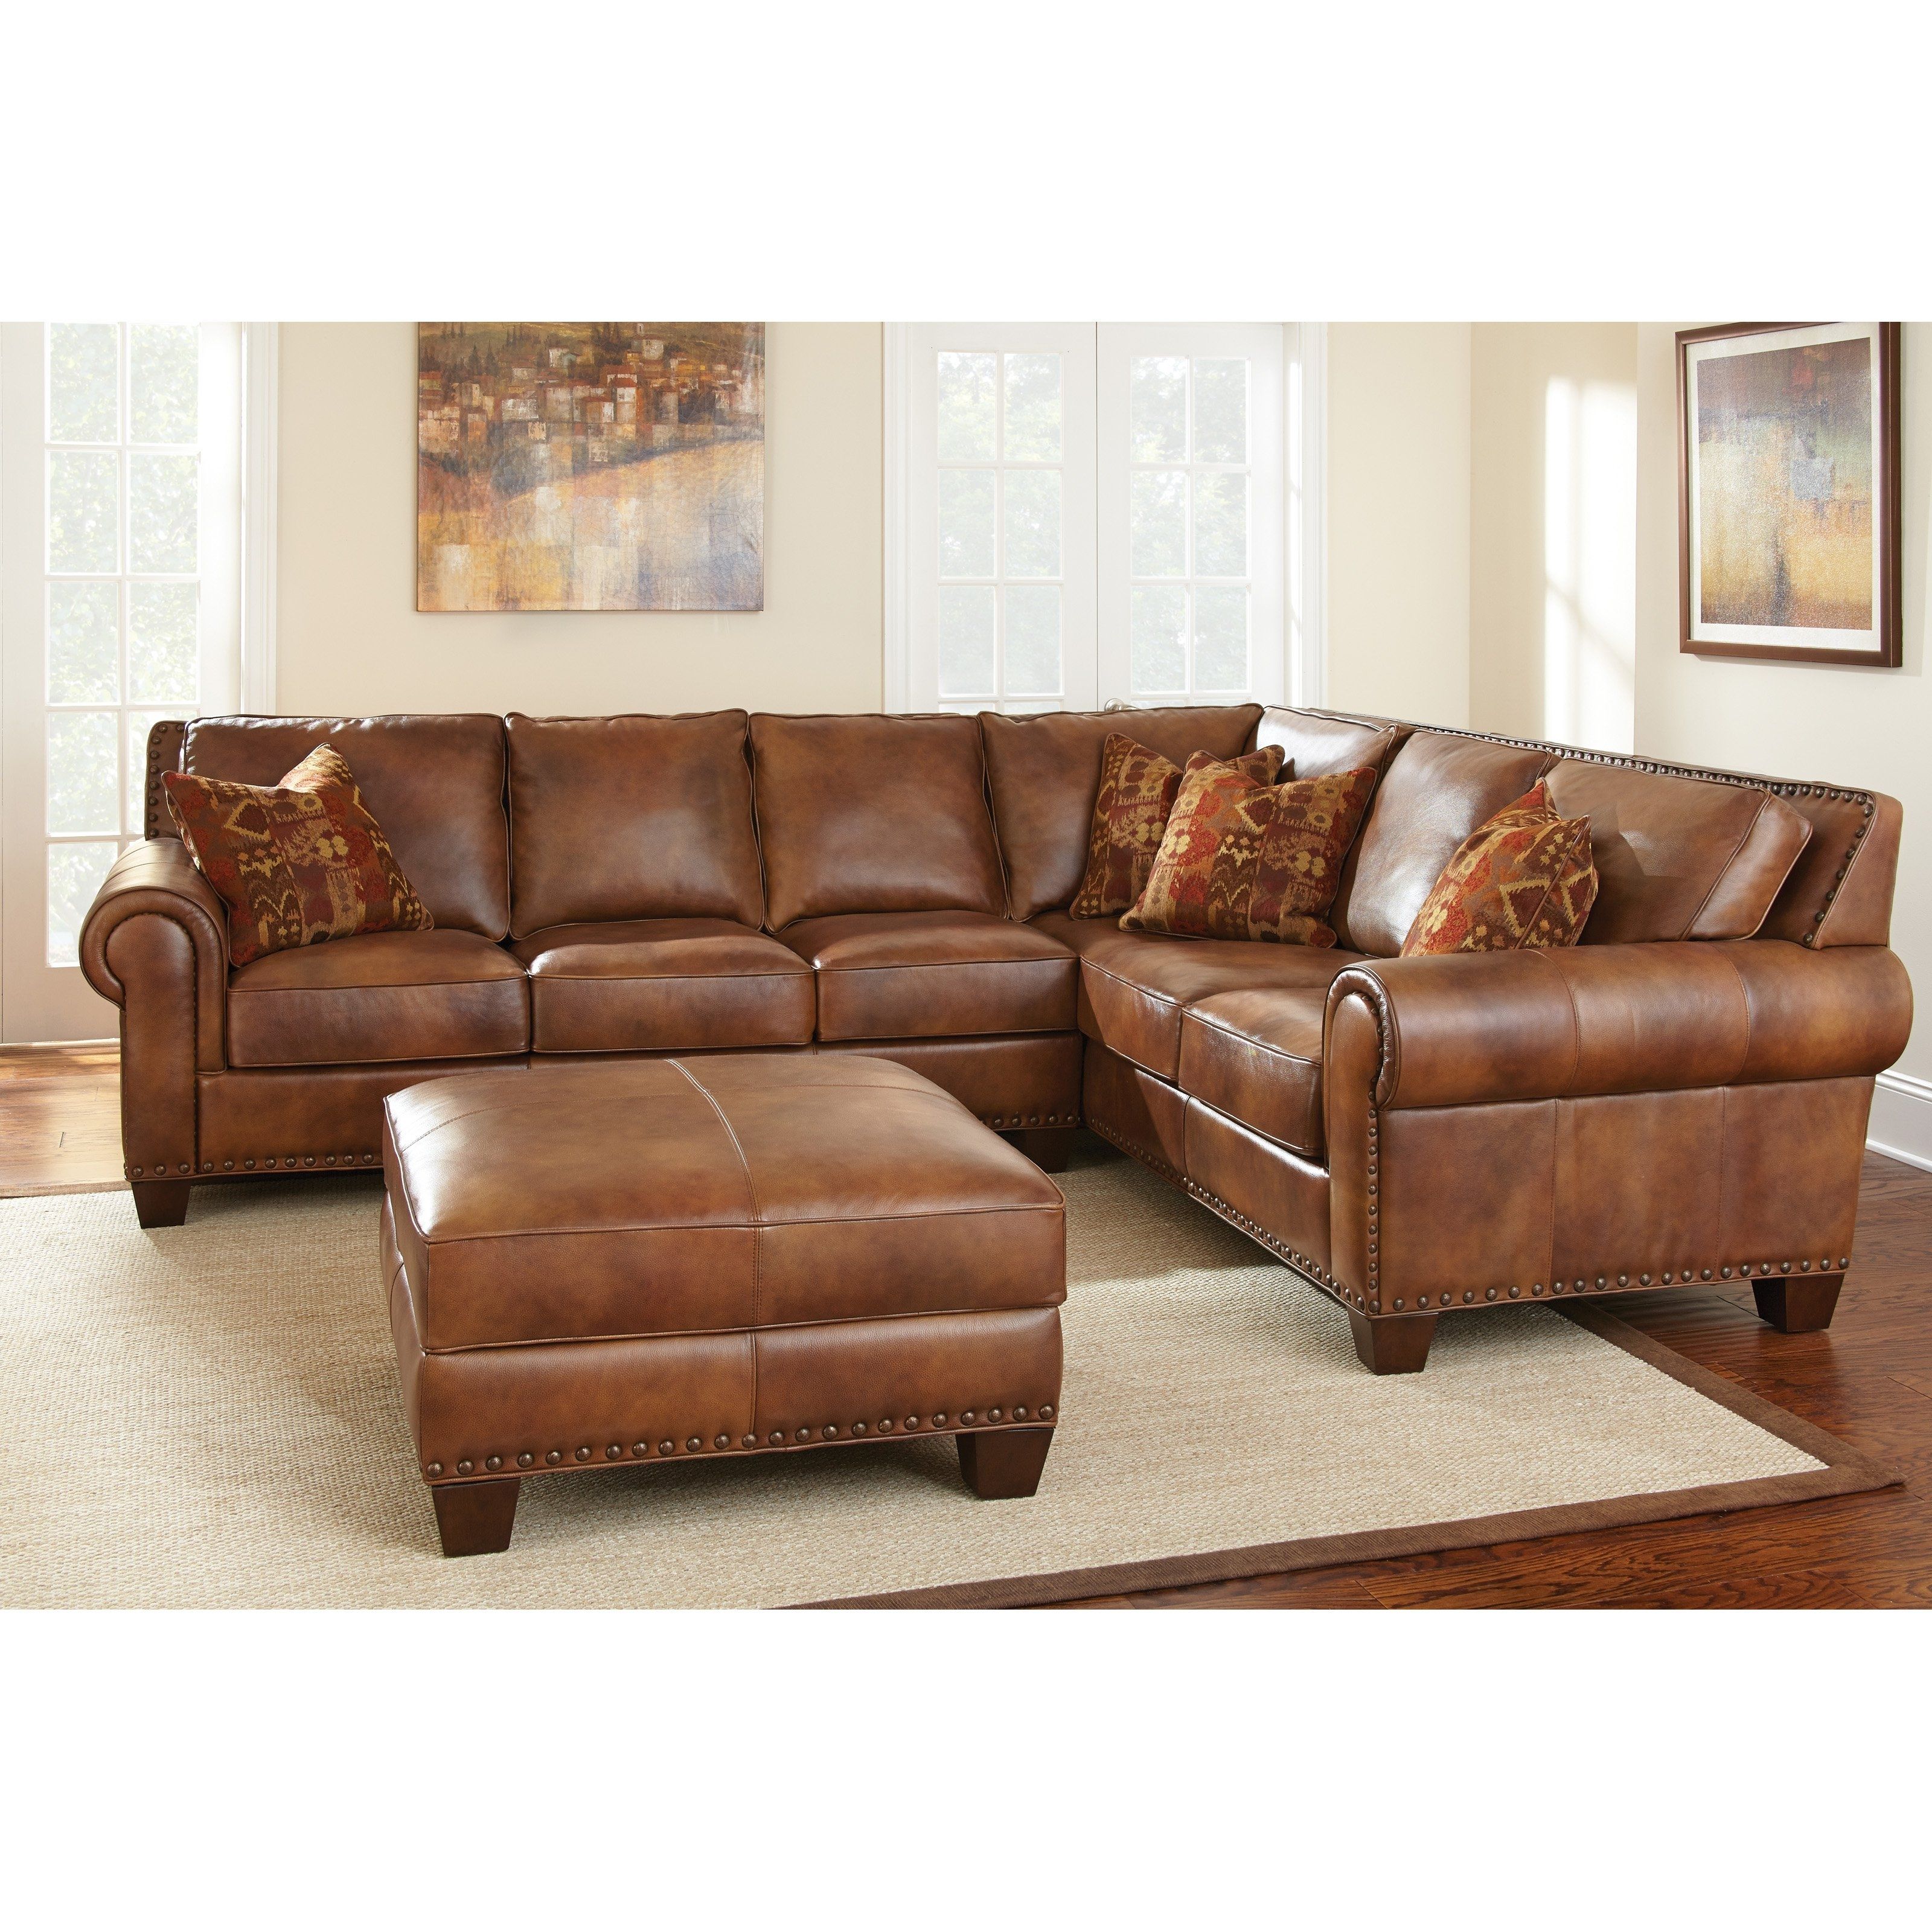 Have To Have It. Steve Silver Silverado Sectional Sofa With Optional Throughout Ivan Smith Sectional Sofas (Photo 4 of 10)